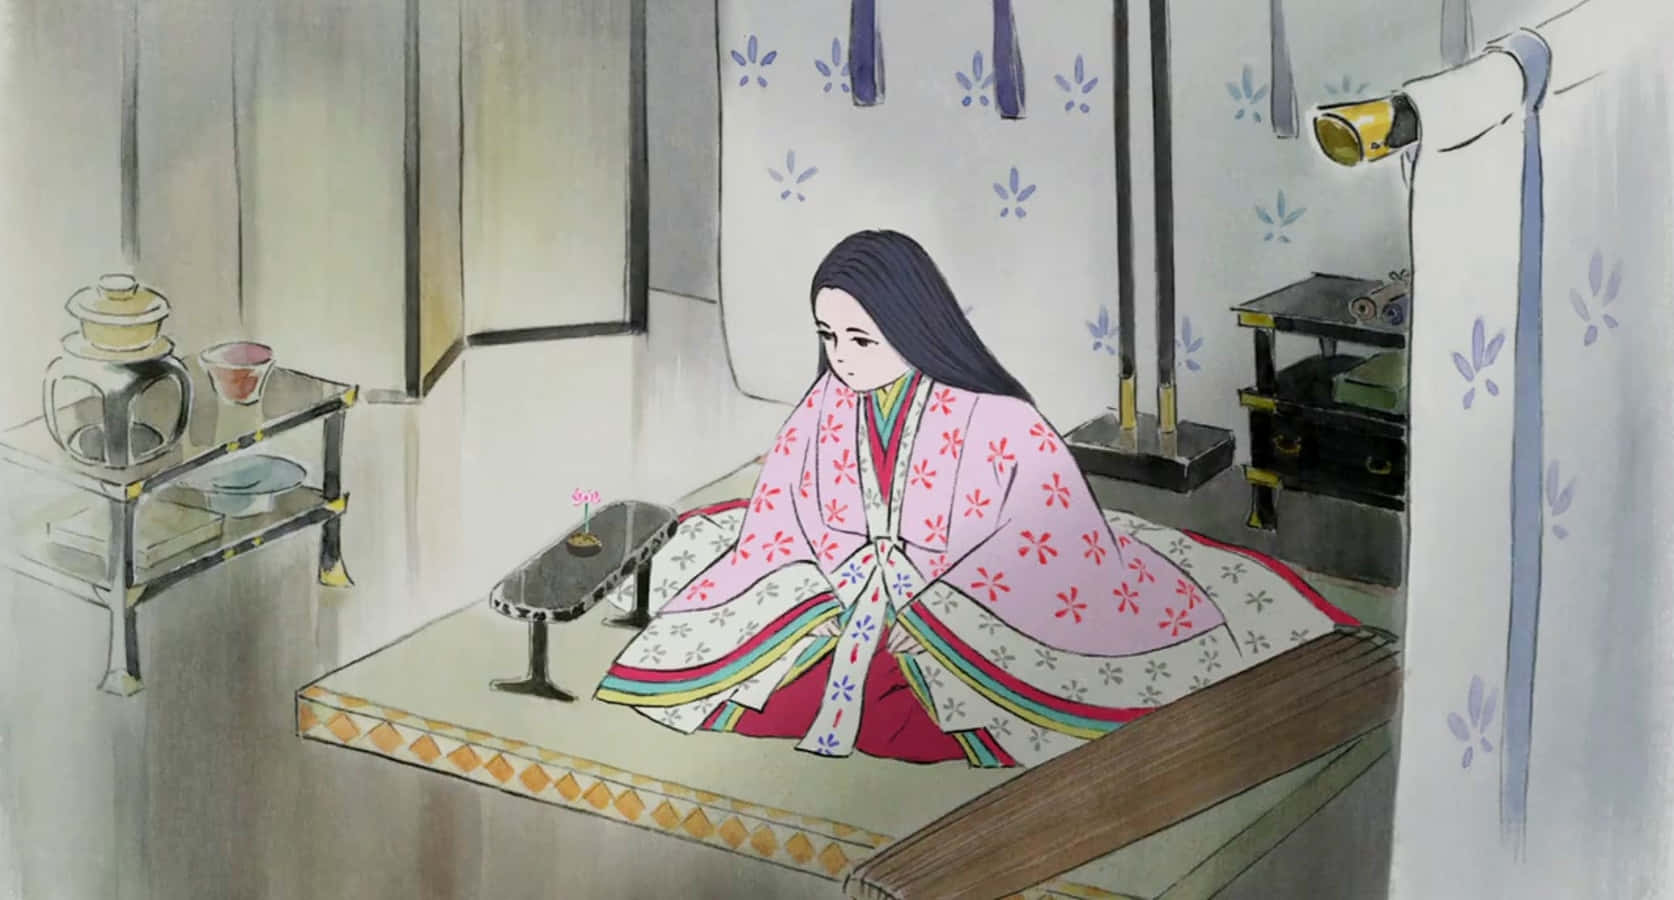 Portrait of Princess Kaguya in a scene from the animated film "The Tale of the Princess Kaguya" Wallpaper